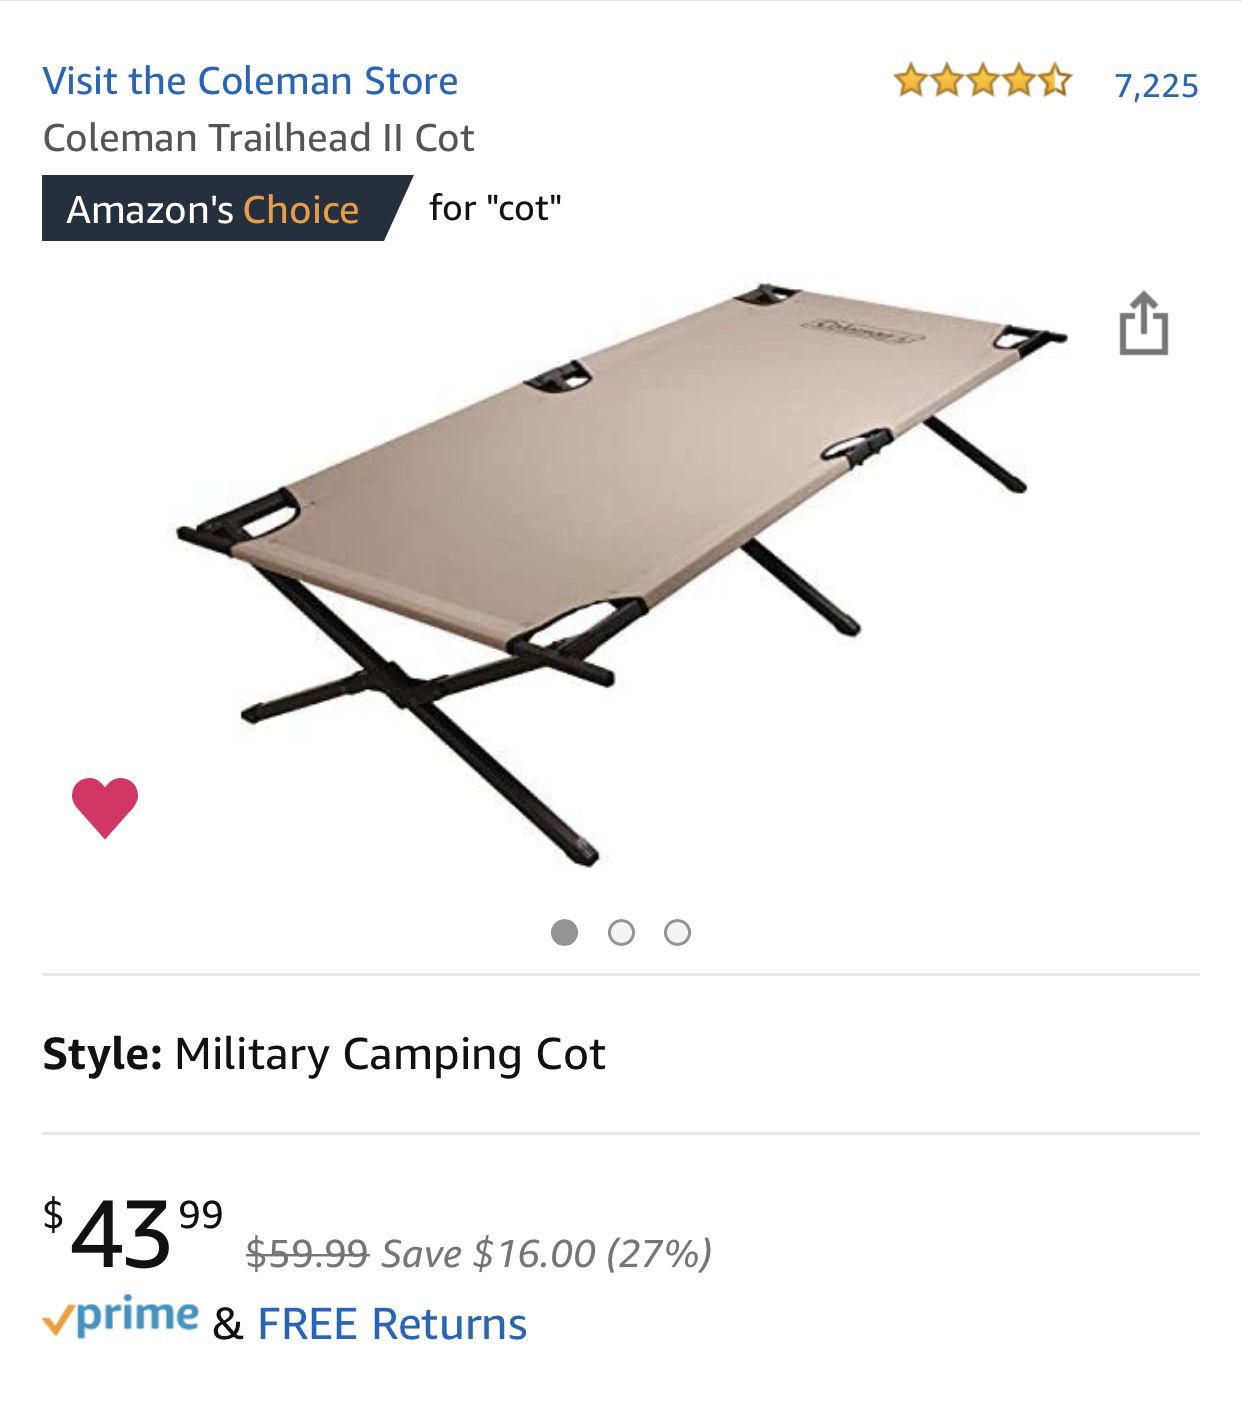 NEW!!! Coleman - Camping Cot